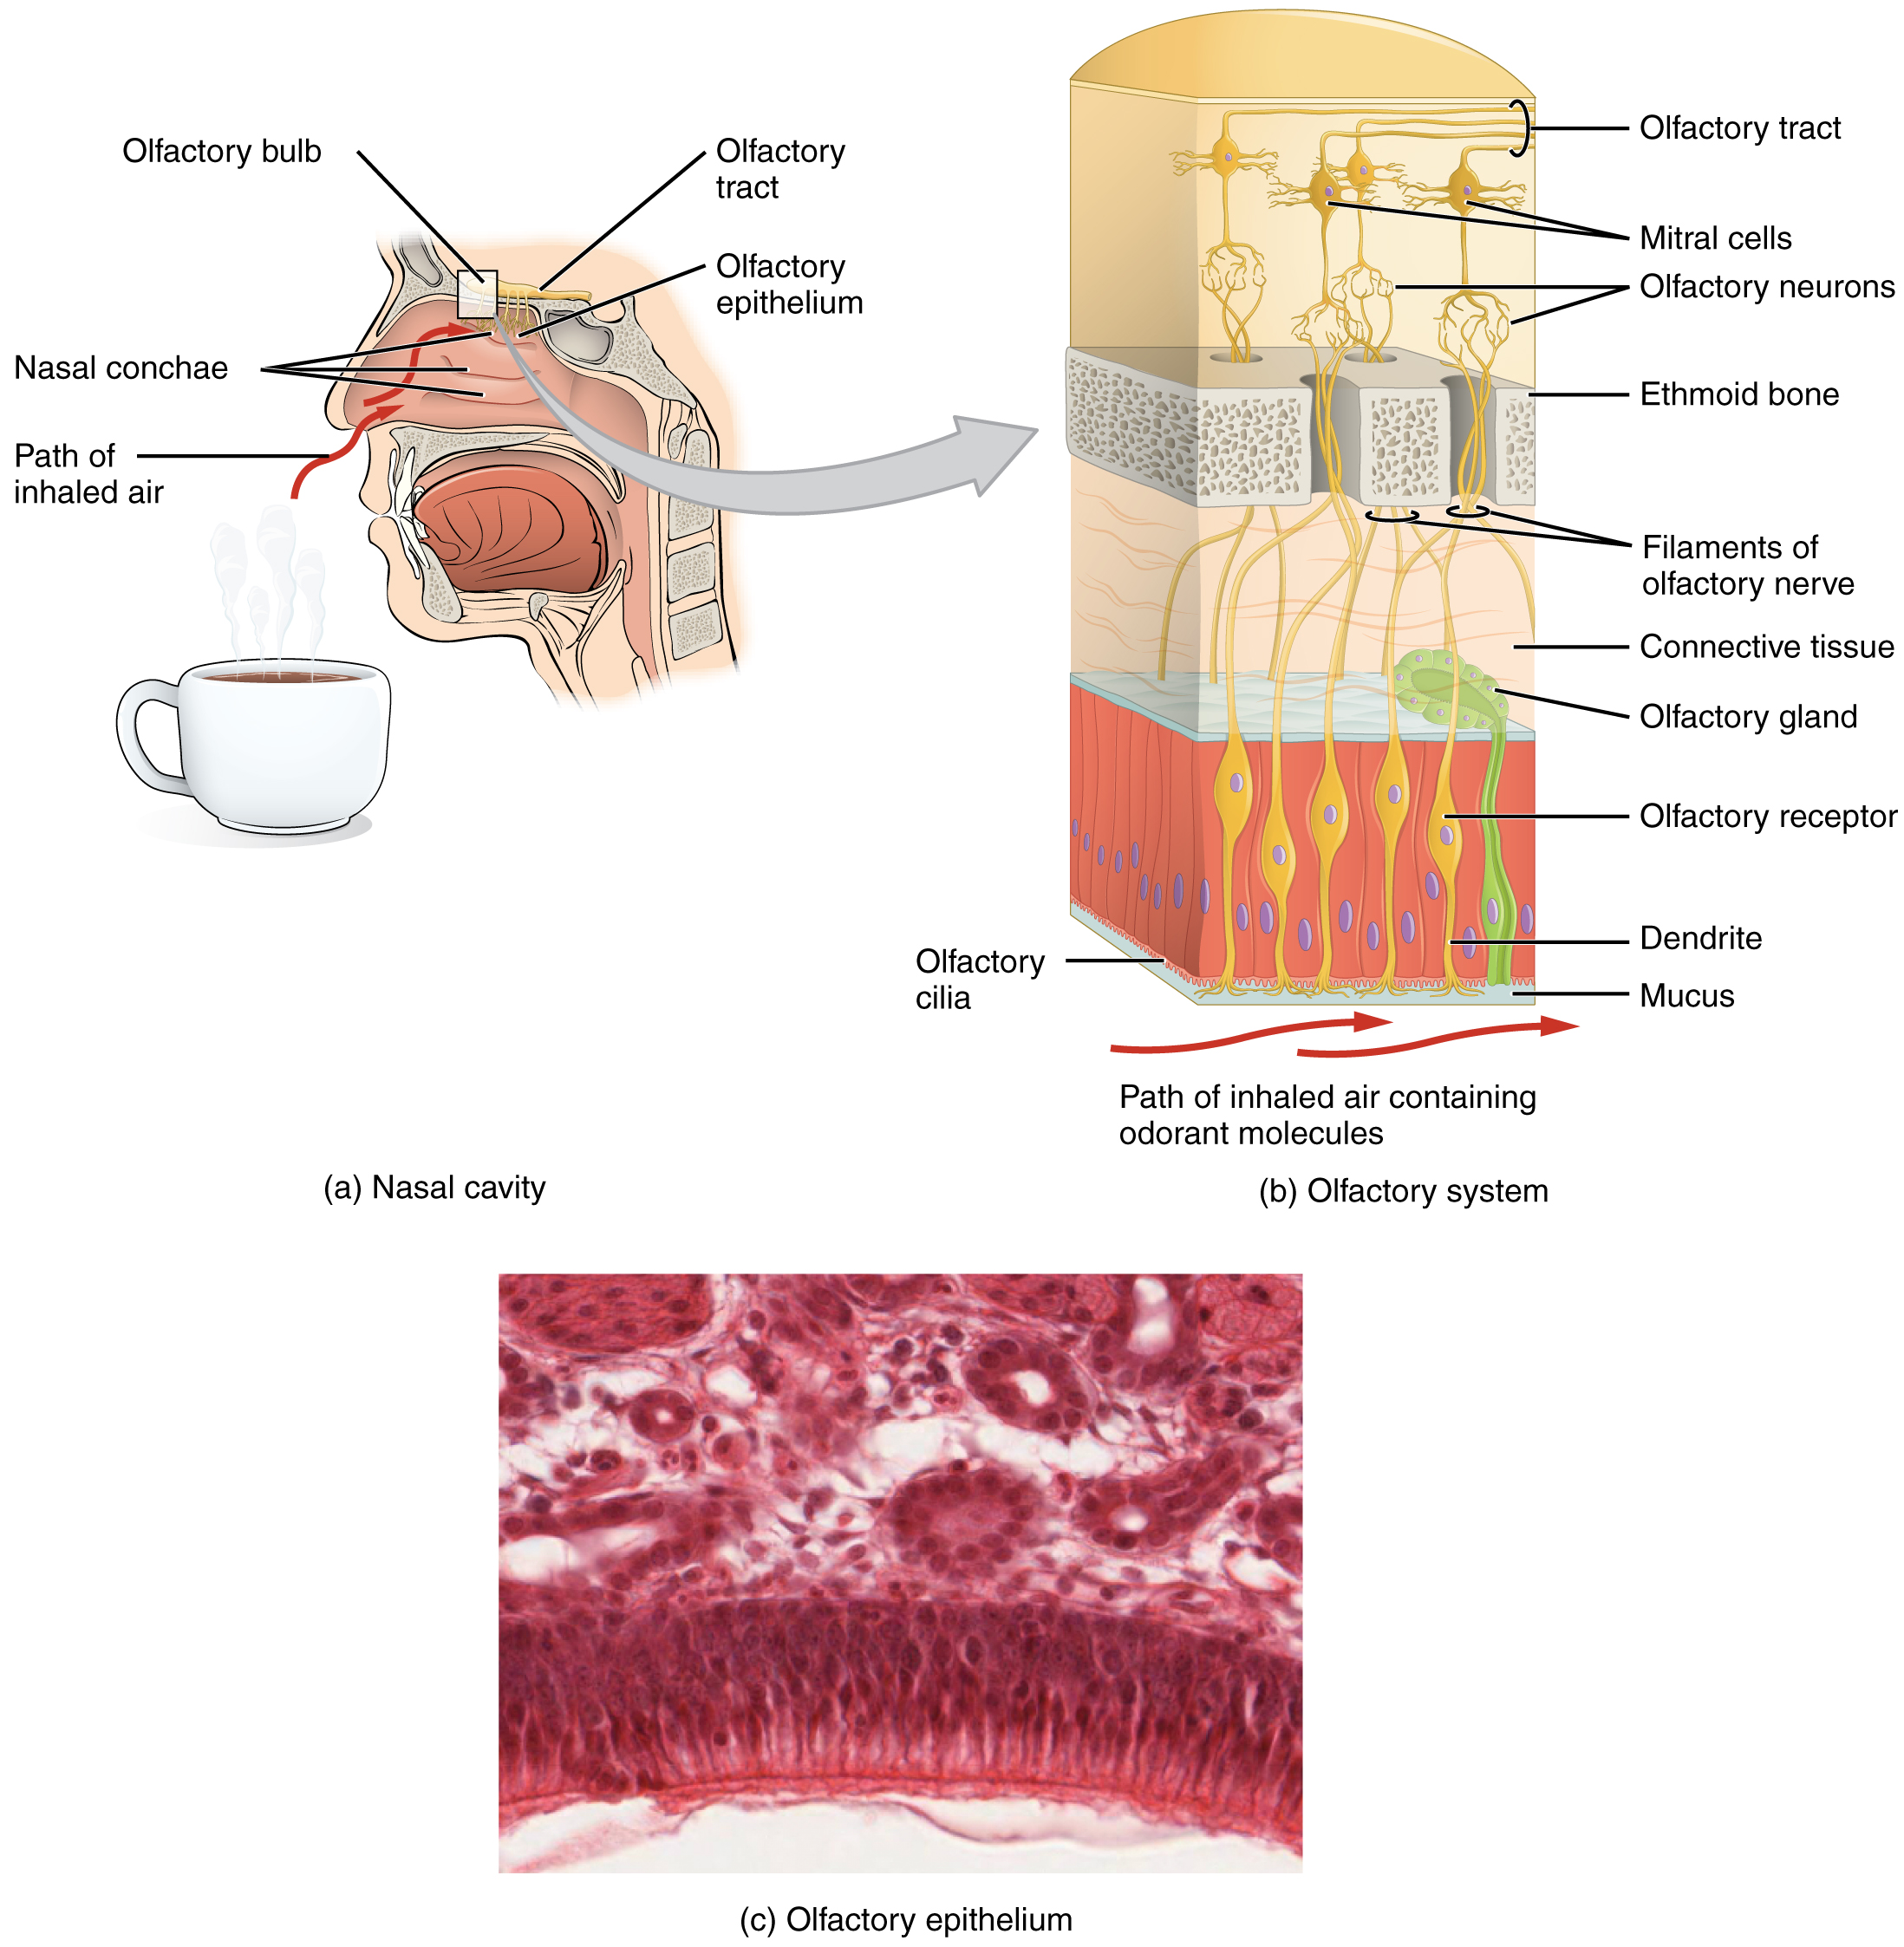 The top left panel of this image shows the side view of a person’s face with a cup containing a beverage underneath the nose. The image shows how the aroma of the beverage passes through the nasal cavity. The top right panel shows a detailed ultrastructure of the olfactory bulb. The bottom panel shows a micrograph of the nasal cavity.